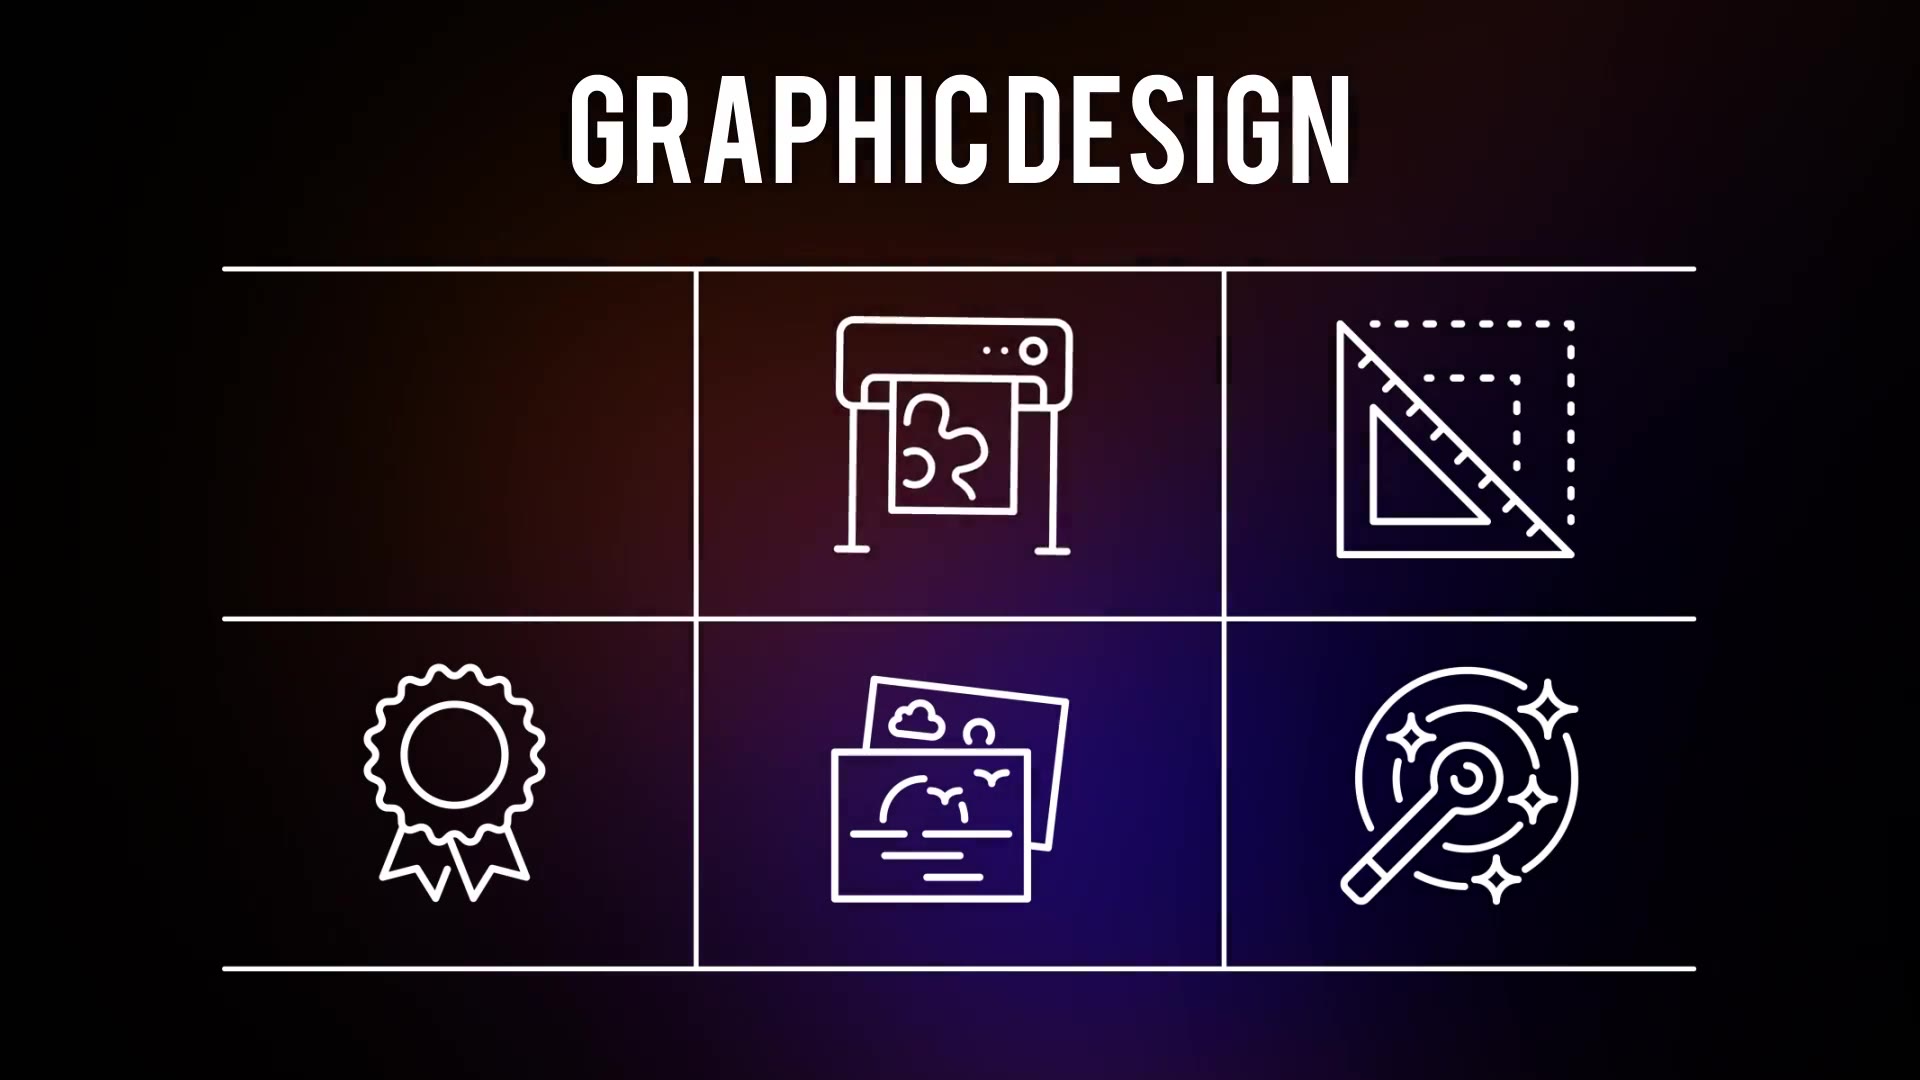 Graphics Designer 25 Outline Icons - Download Videohive 23194972